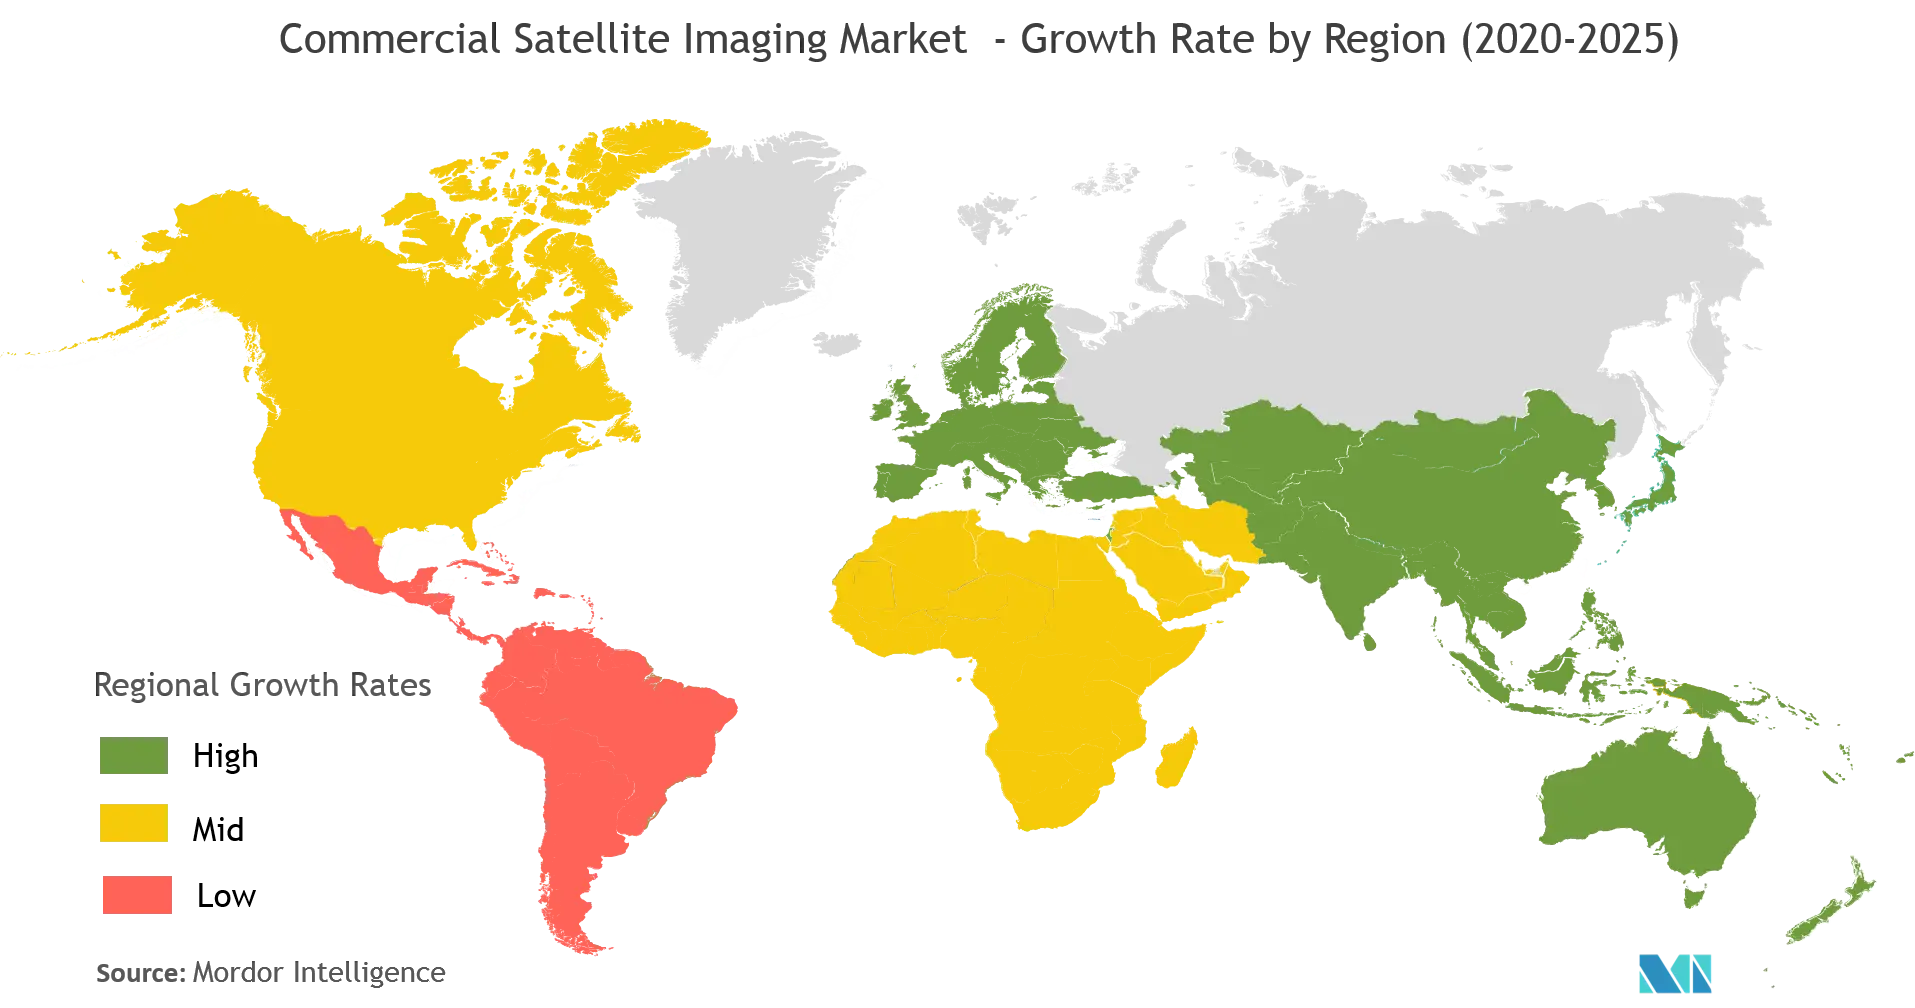 Commercial Satellite Imaging Market Growth Rate